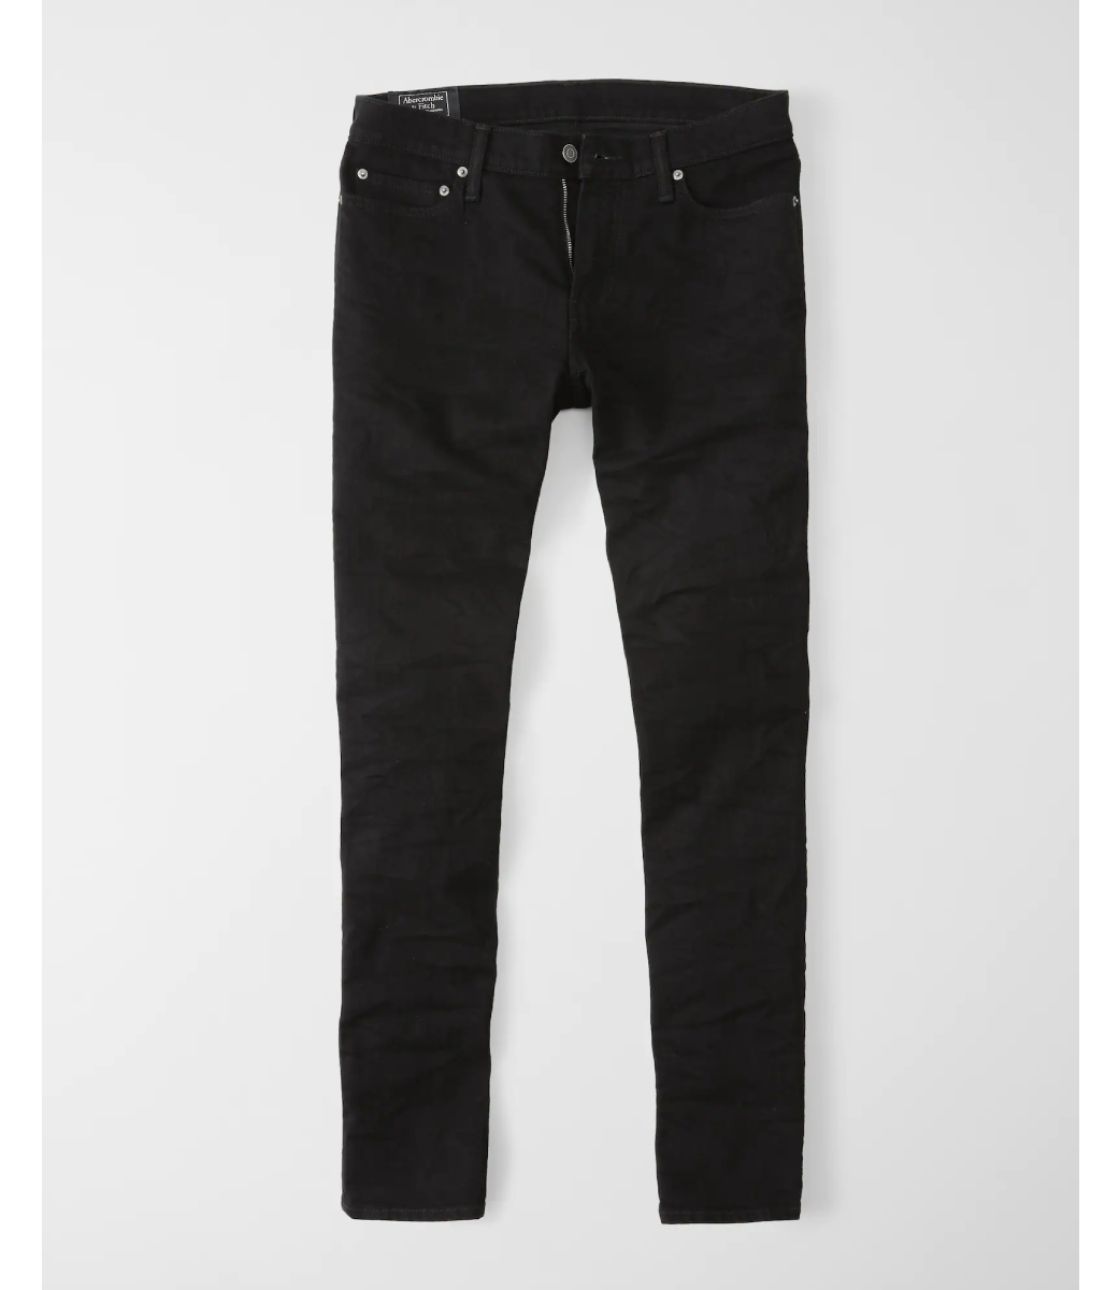 Quần Jeans Abercrombie & Fitch Skinny Fit 11